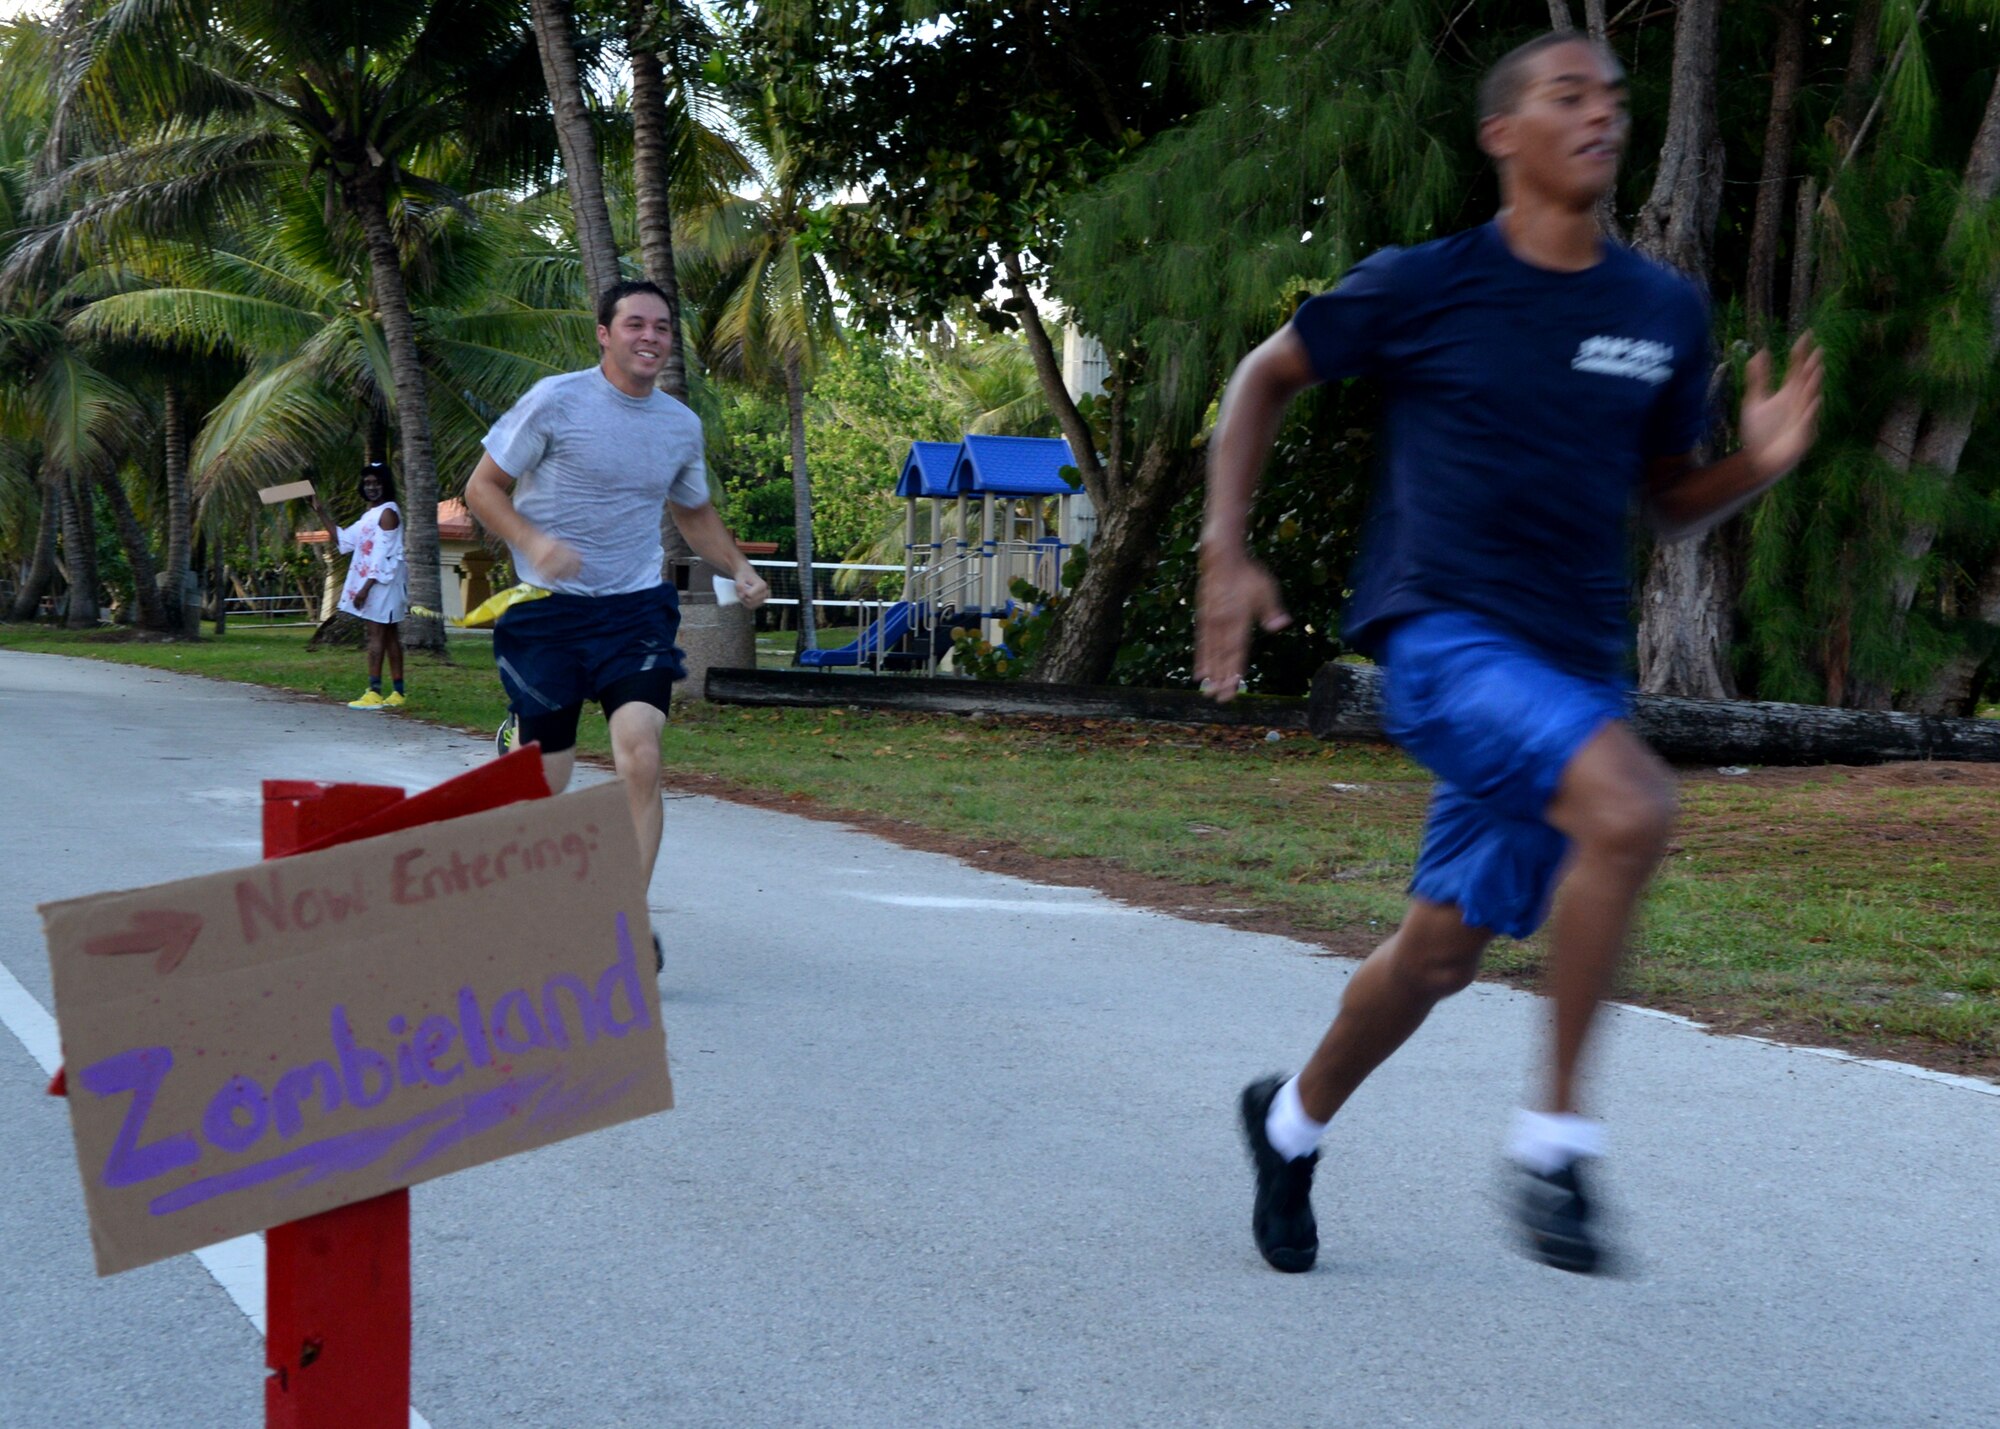 Runners sprint to the finish line during a Zombie 5K Fun Run June 11, 2014, at Tarague Beach on Andersen Air Force Base, Guam. The first male and female that finished the run without losing a “life” represented by yellow flags that hung from their belts received a trophy and the “zombie” who captured the most “lives” won a trophy. (U.S. Air Force photo by Airman 1st Class Amanda Morris/Released)